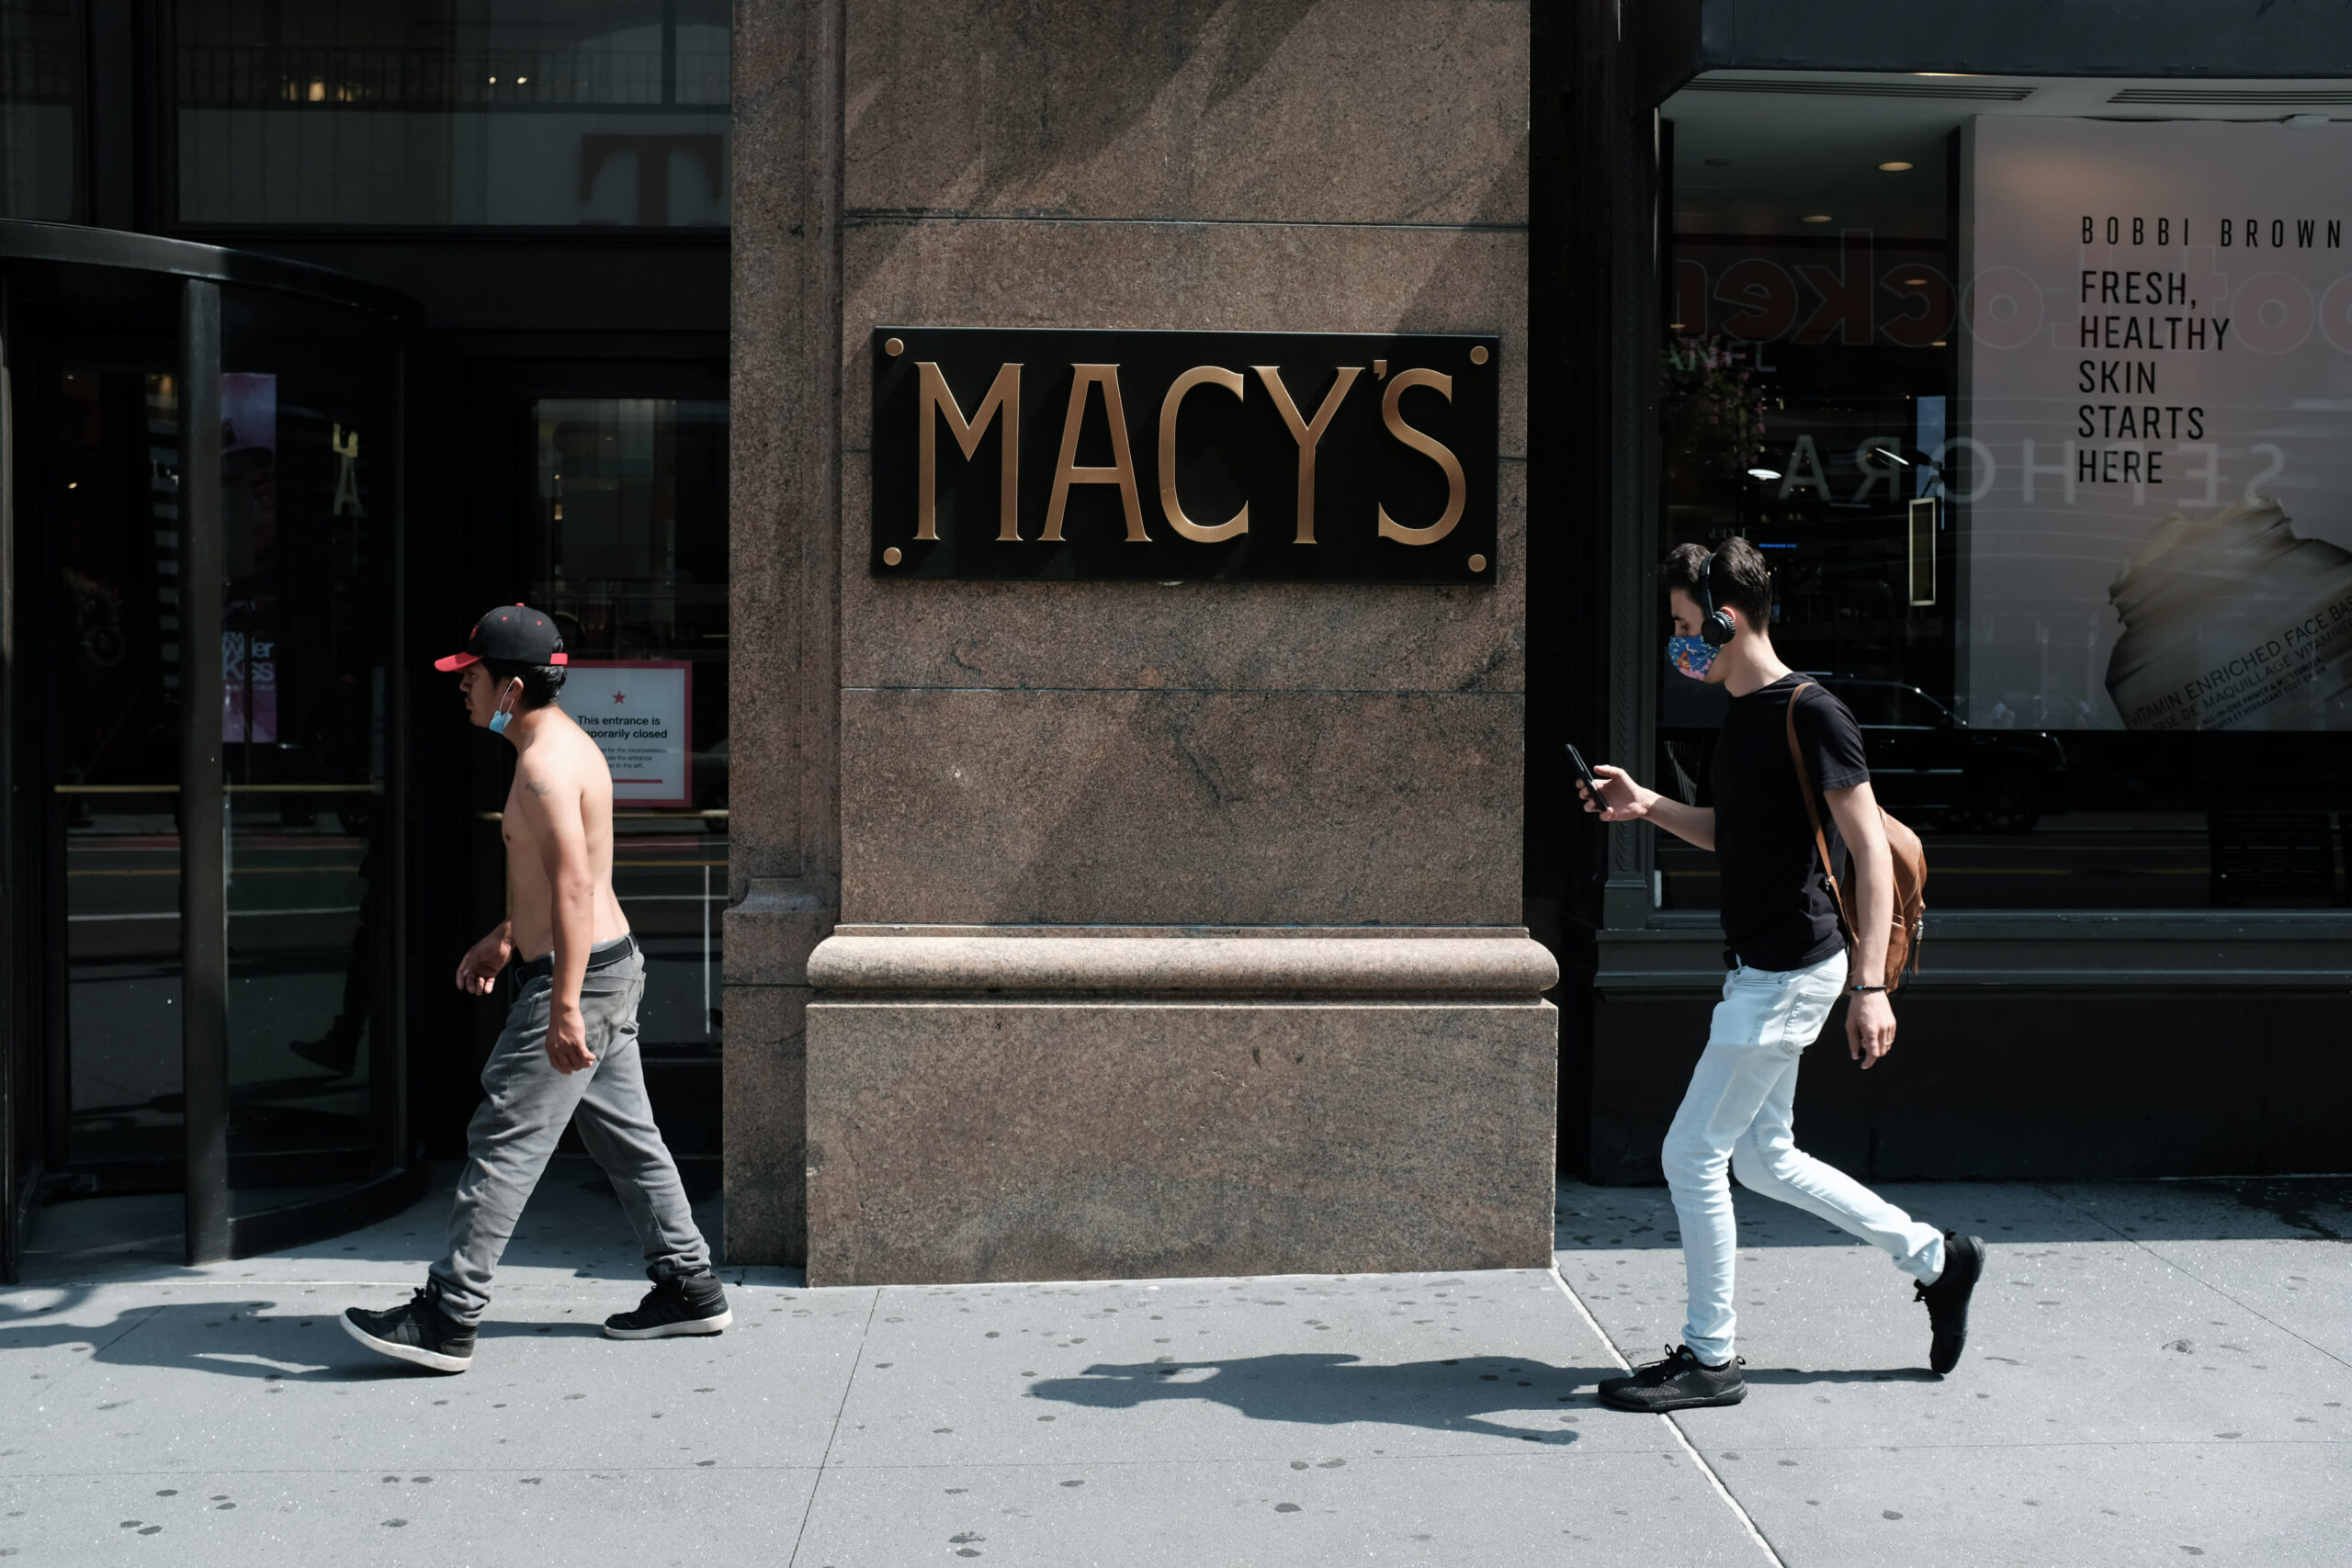 Macy's (M) Reports Second Quarter 2020 Net Loss, Same Store Sales Down 35%